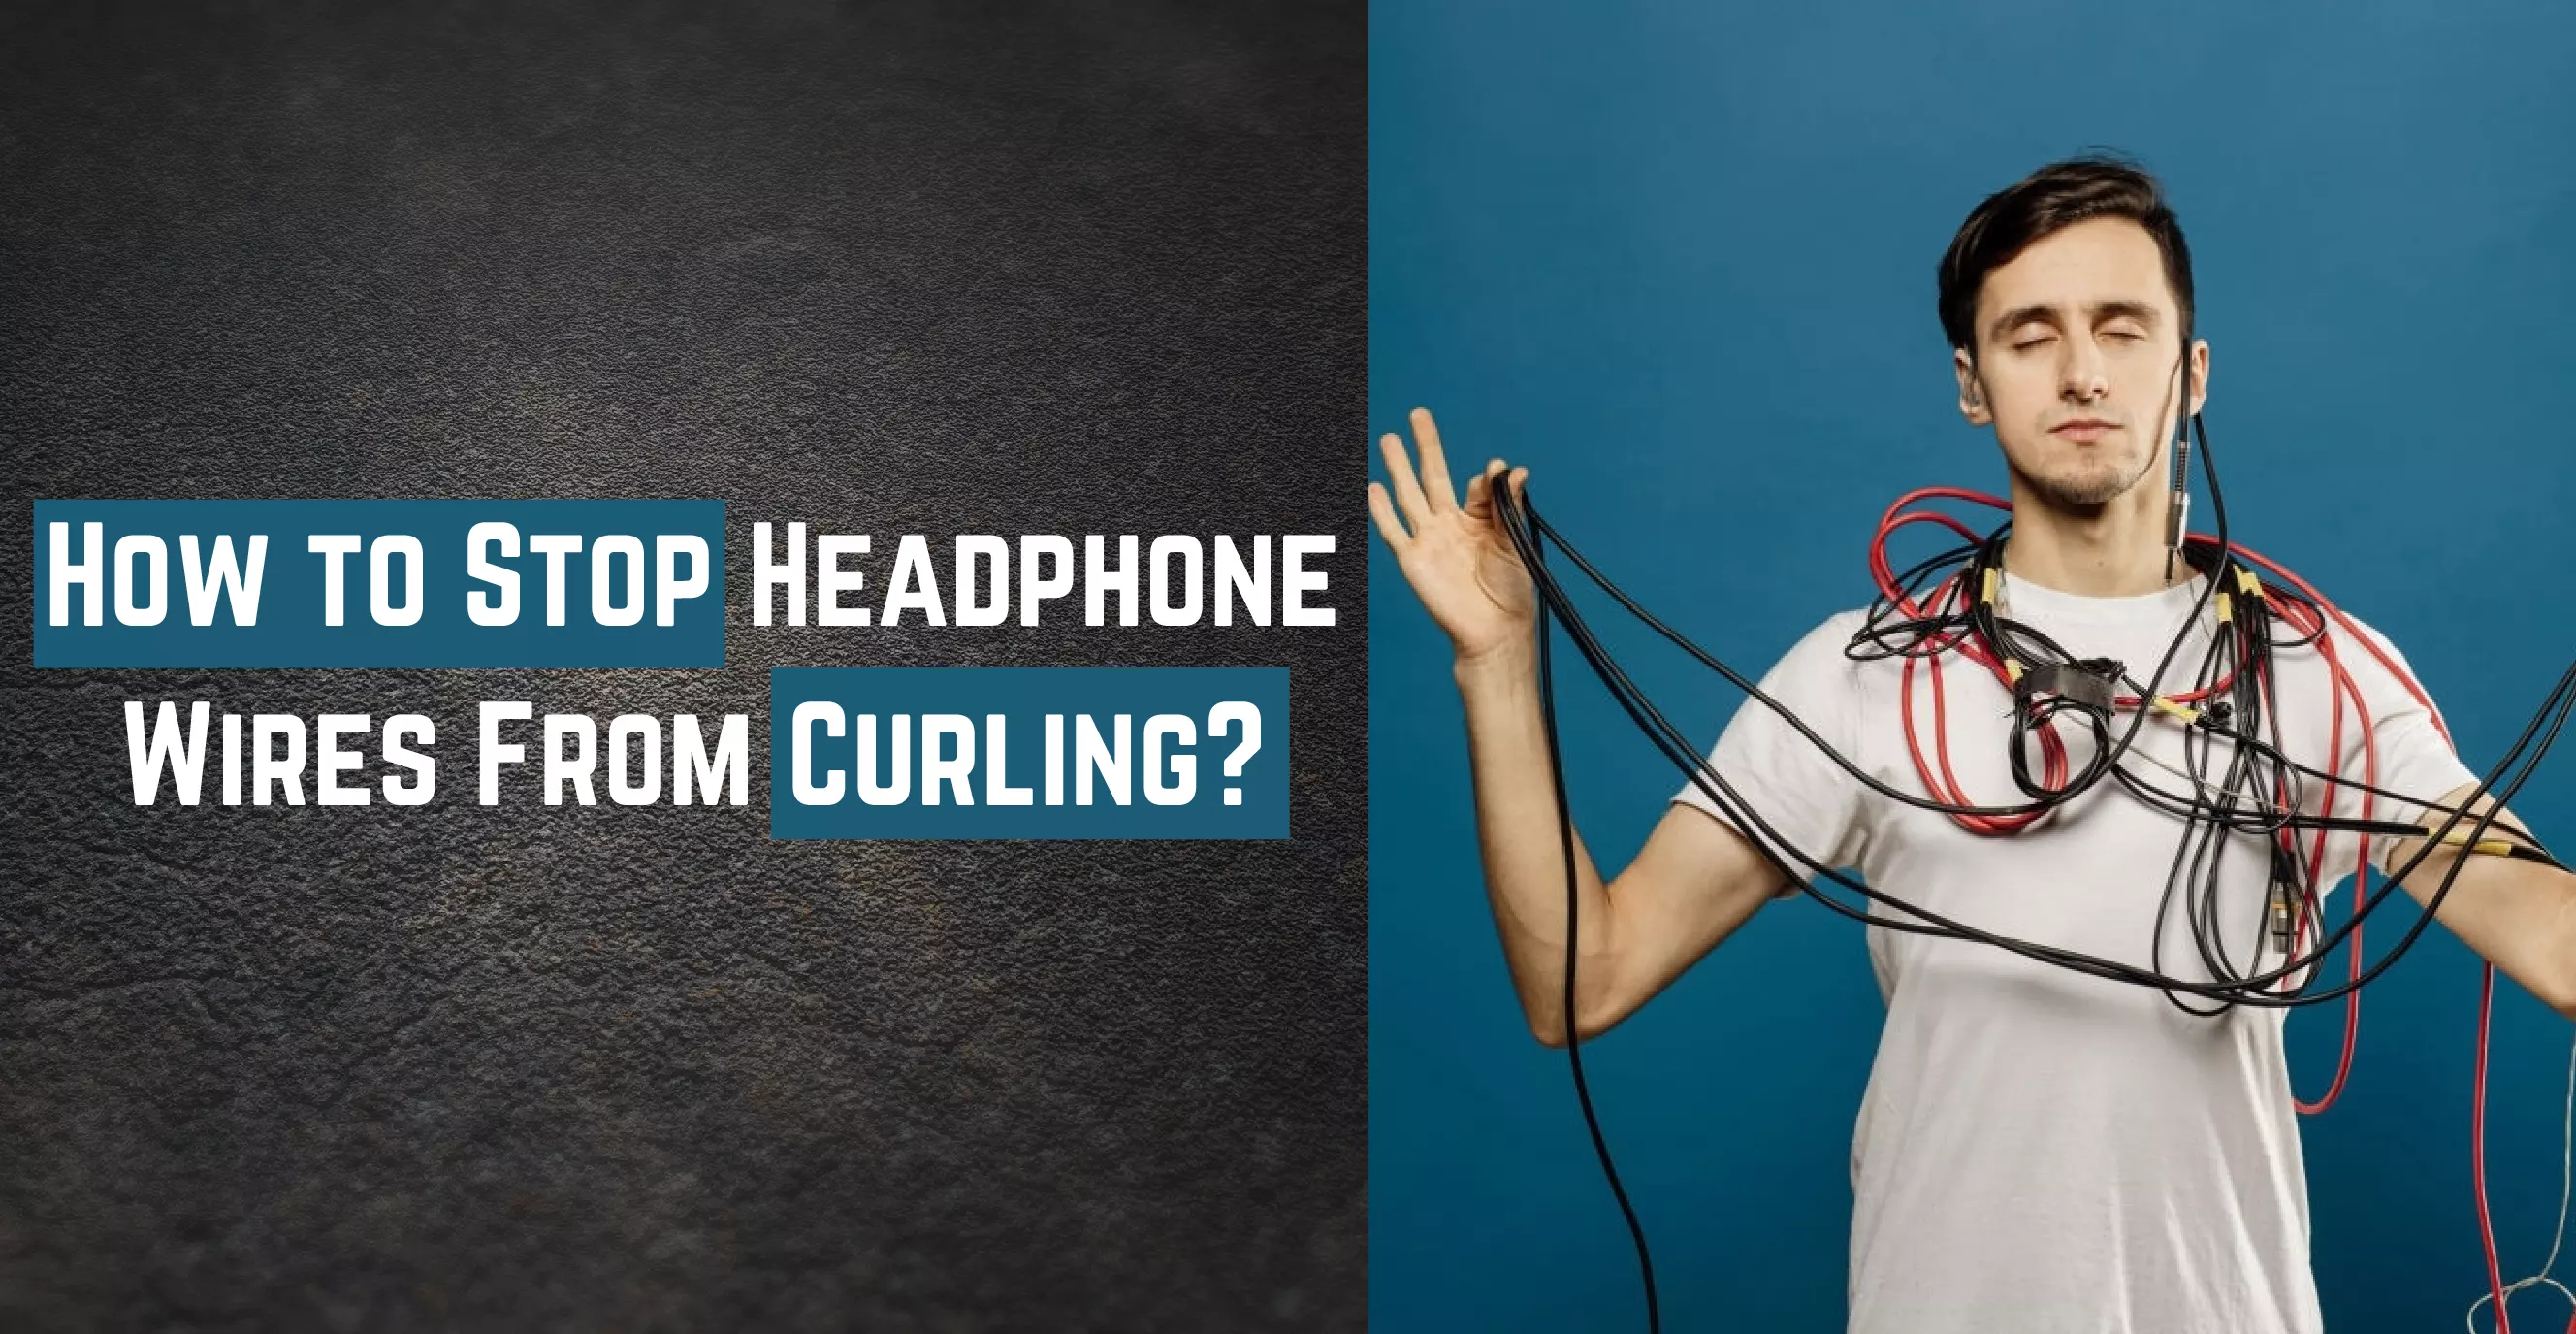 How to Stop Headphone Wires From Curling